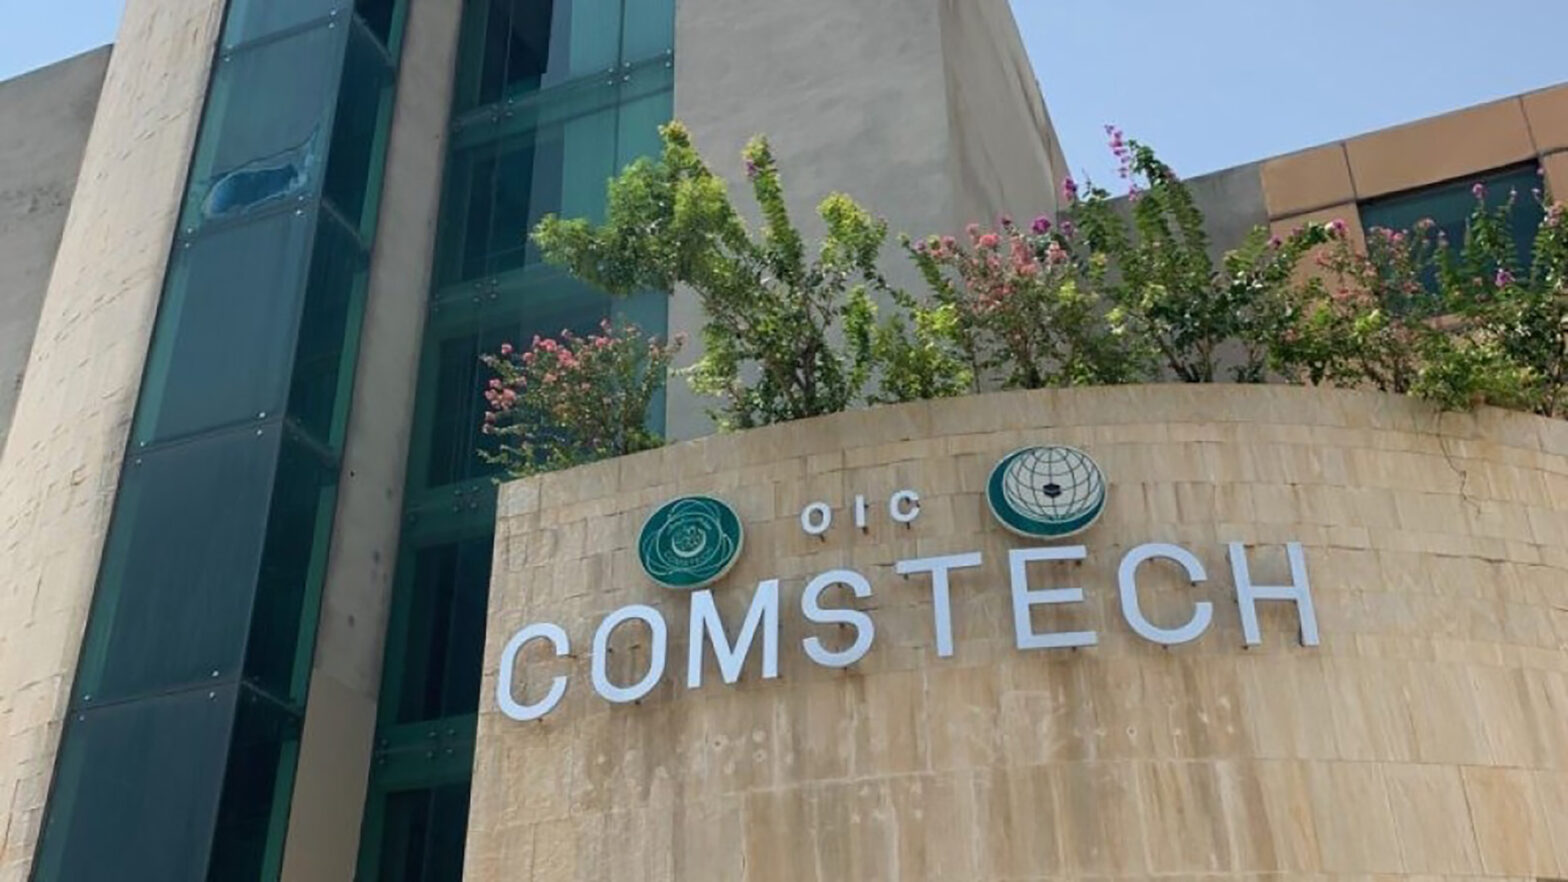 COMSTECH, PEC ink MoU to upscale engineering capacity of OIC states